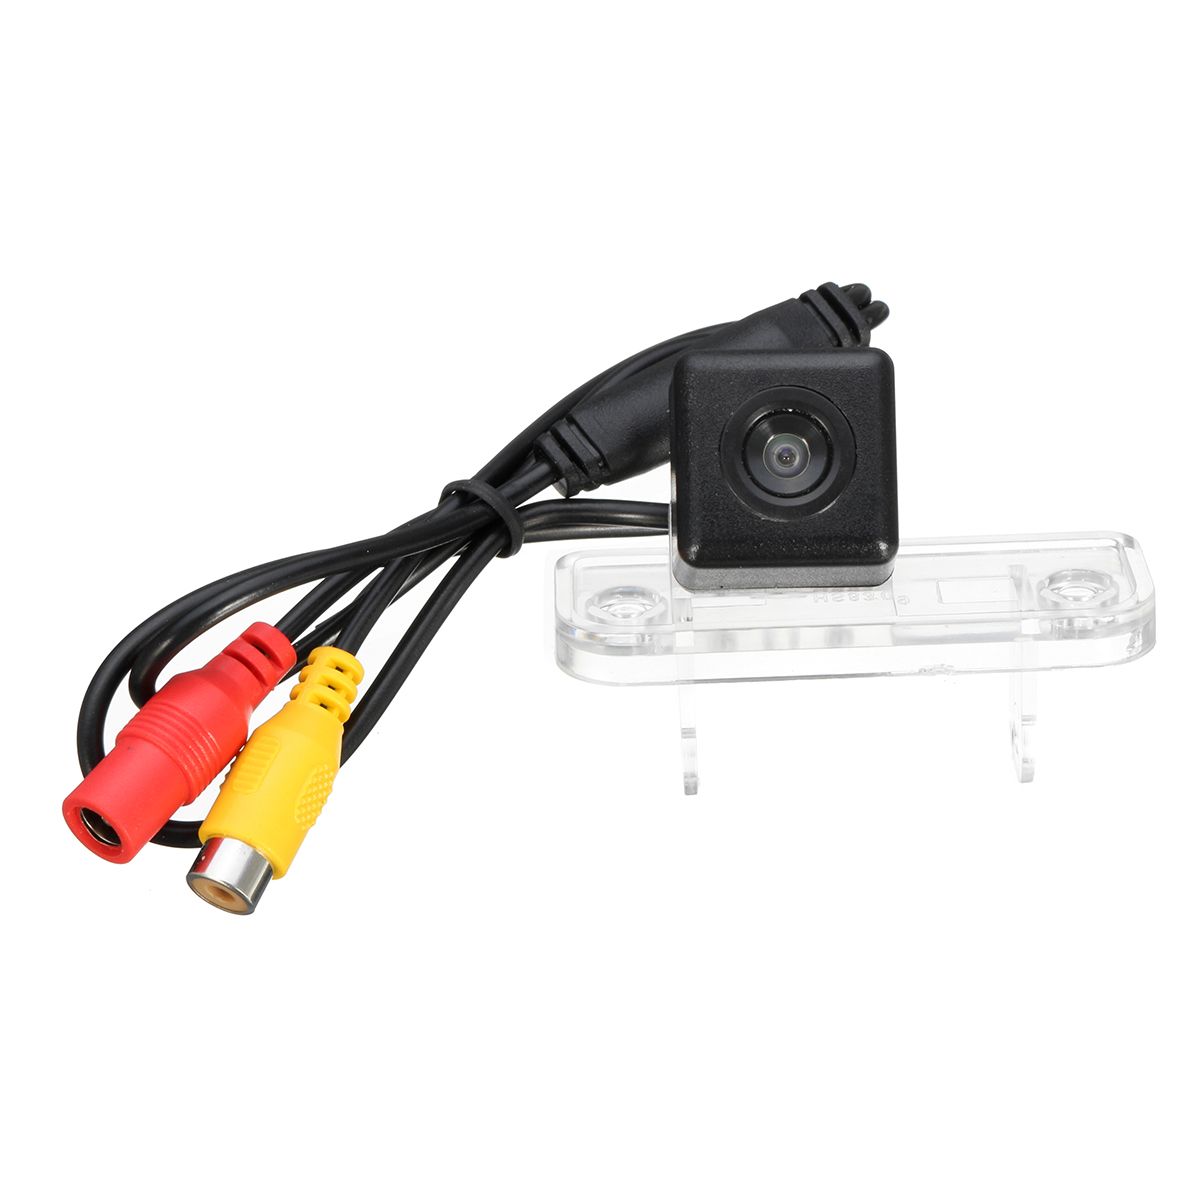 Wireless-CCD-Car-Reverse-Backup-Rear-View-Camera-For-Mercedes-E-Class-W211-1148610